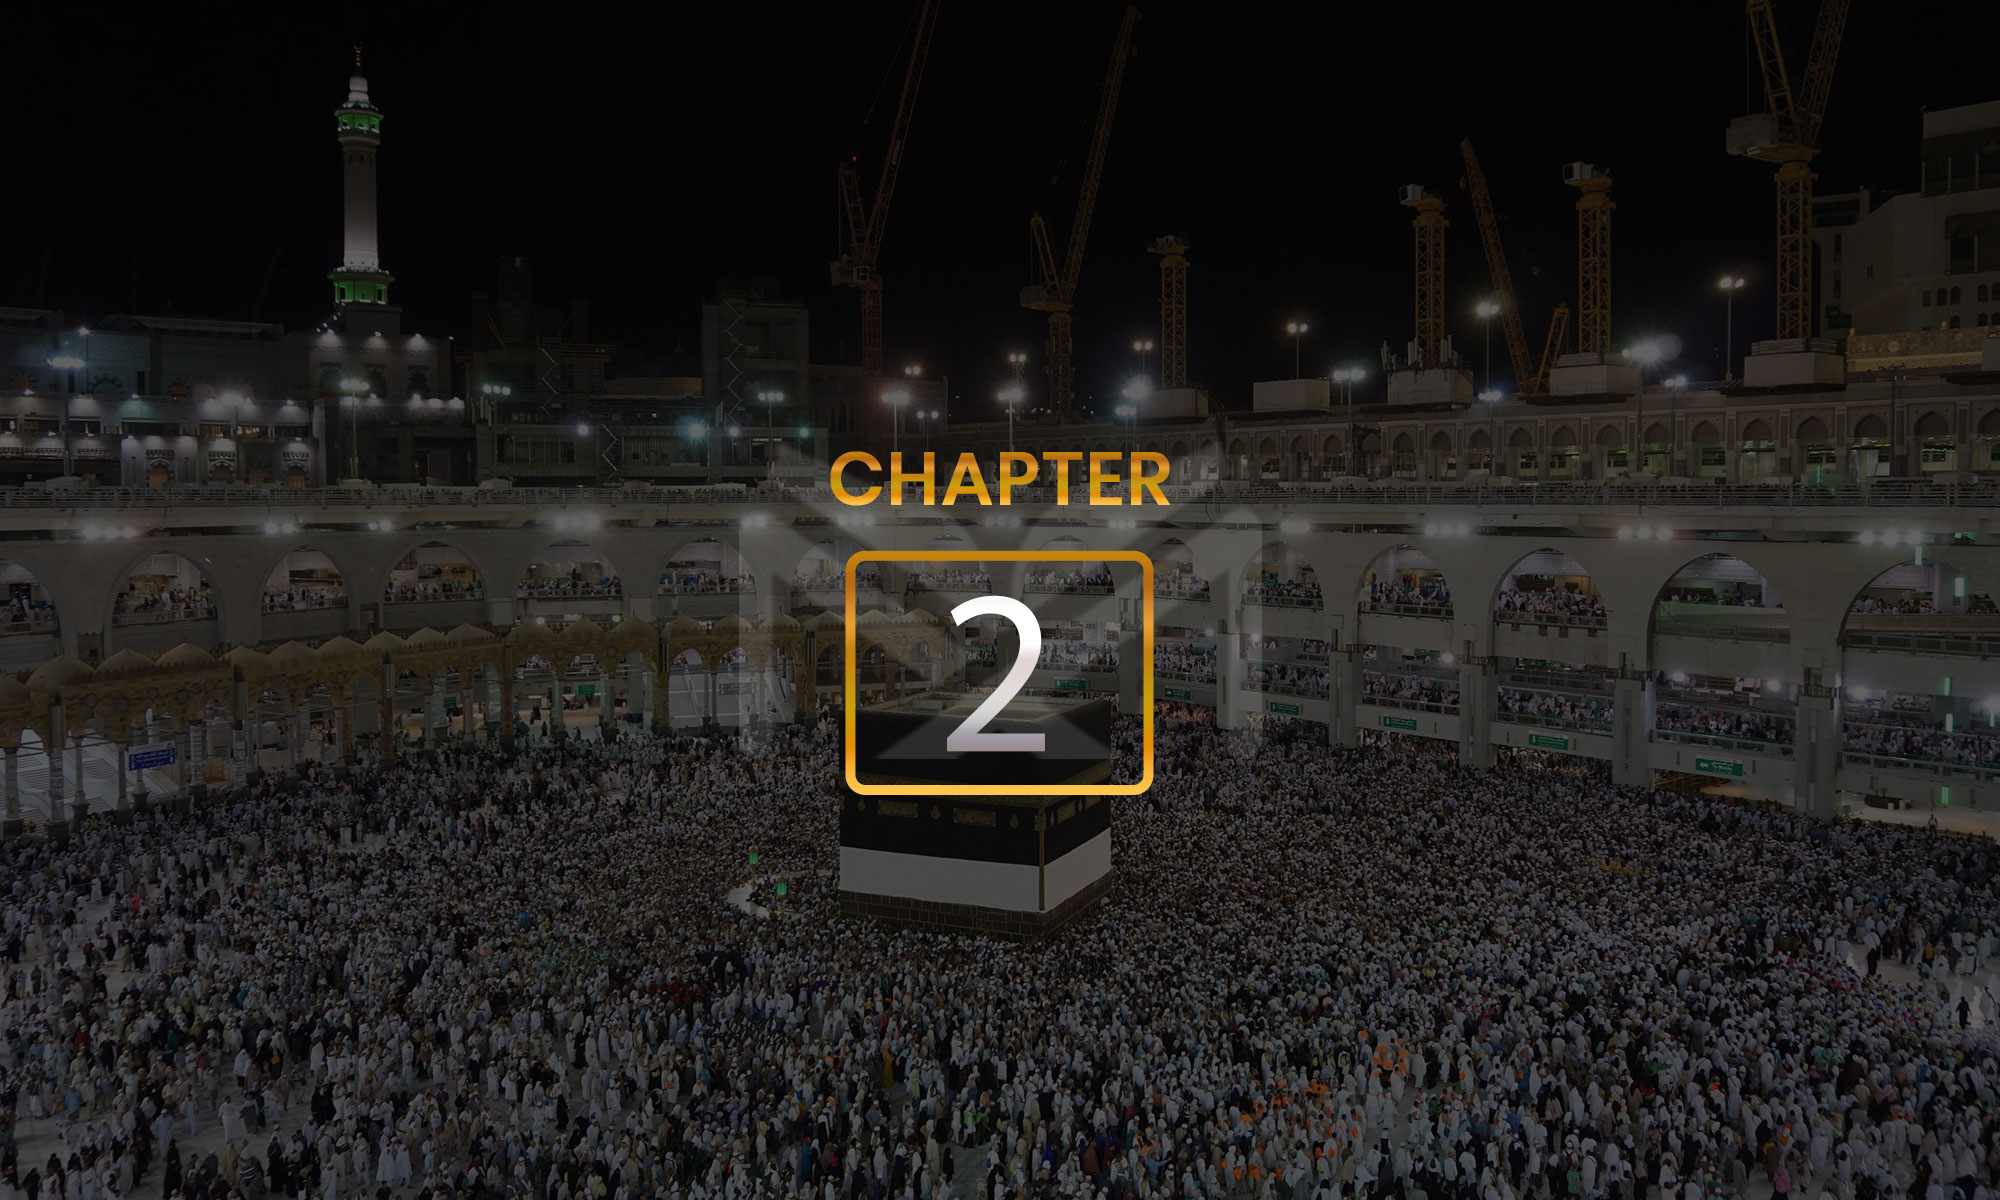 Mecca, the Kaaba, and the Quraysh